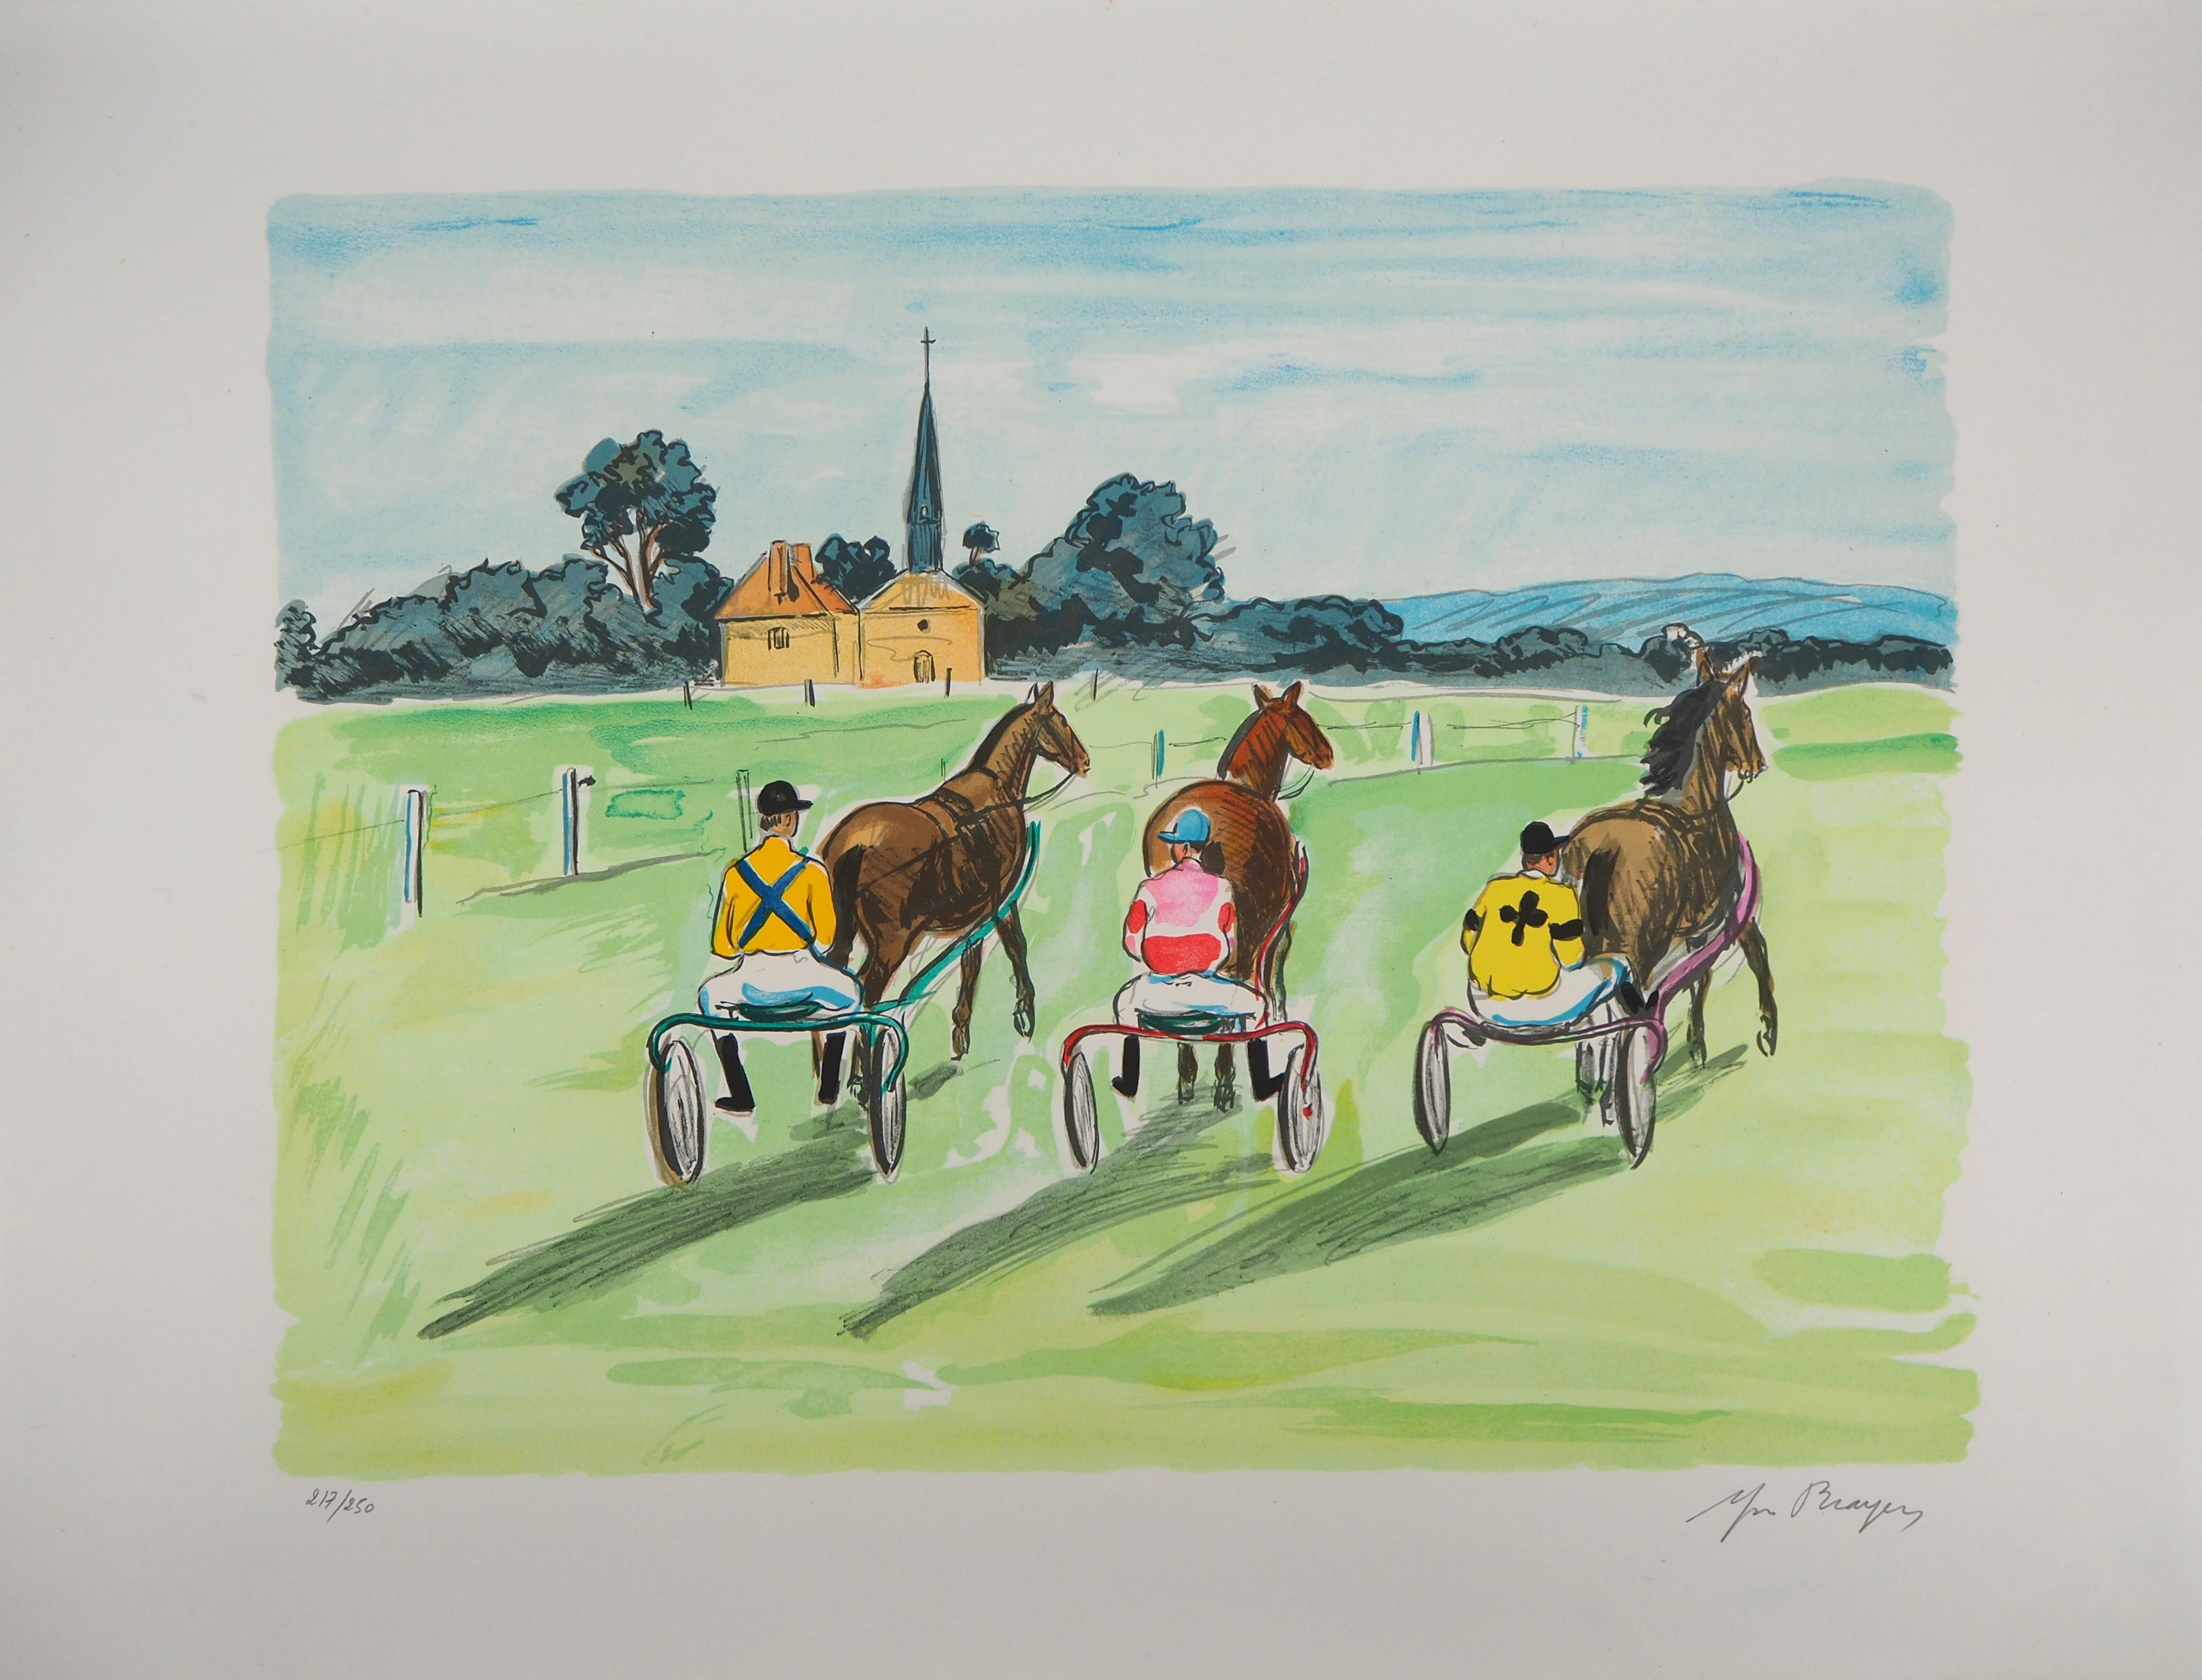 Yves Brayer Landscape Print - Before the Trotting Race - Original Lithograph Handsigned Numbered